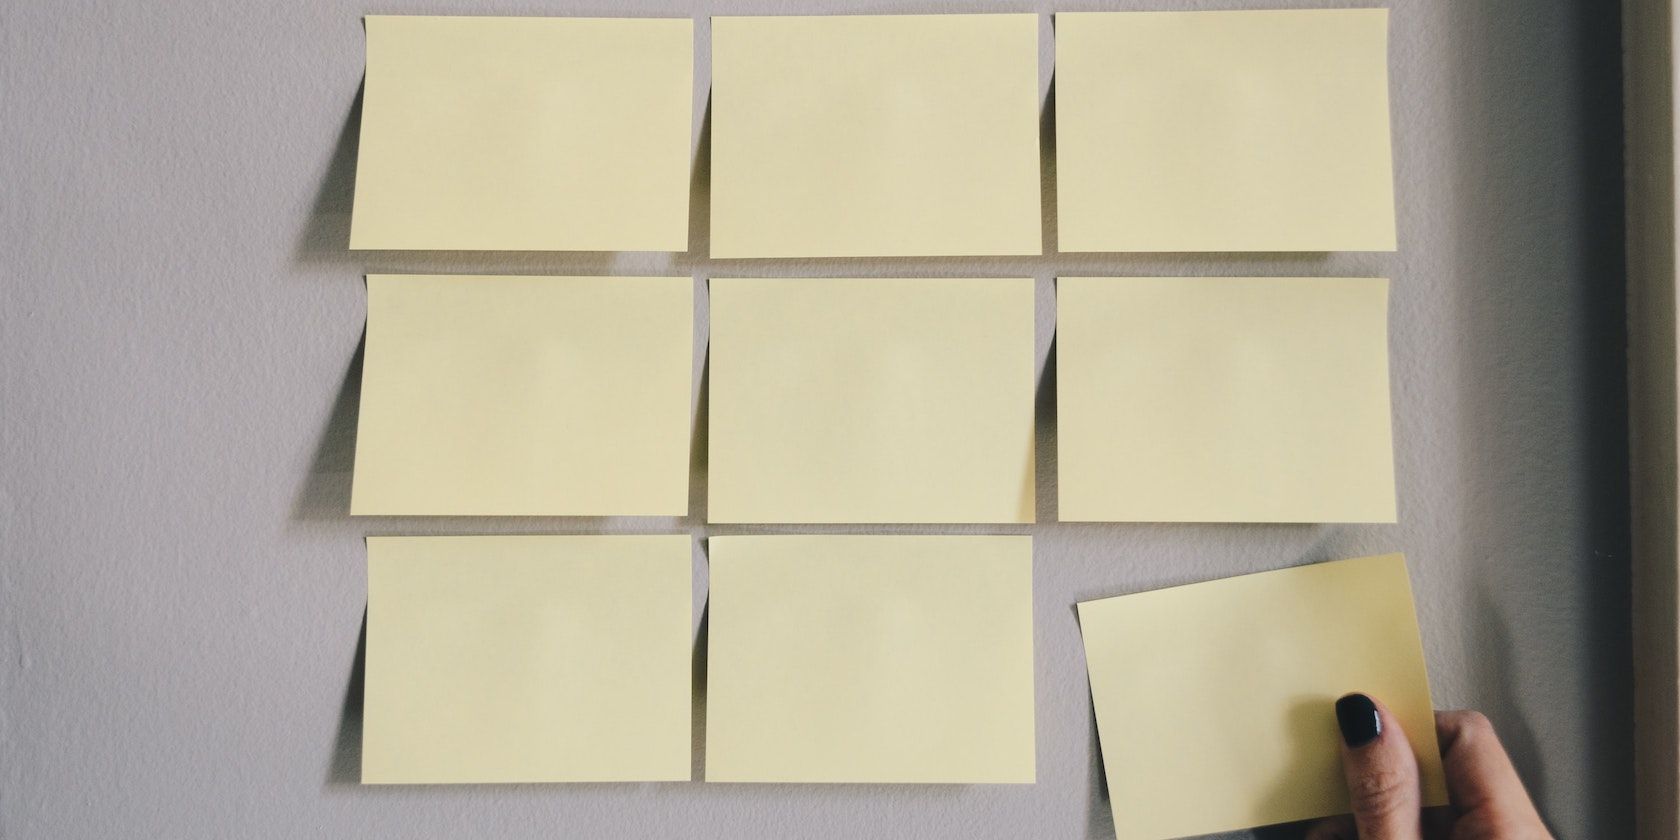 A grid of yellow sticky notes with a hand removing the lower right note